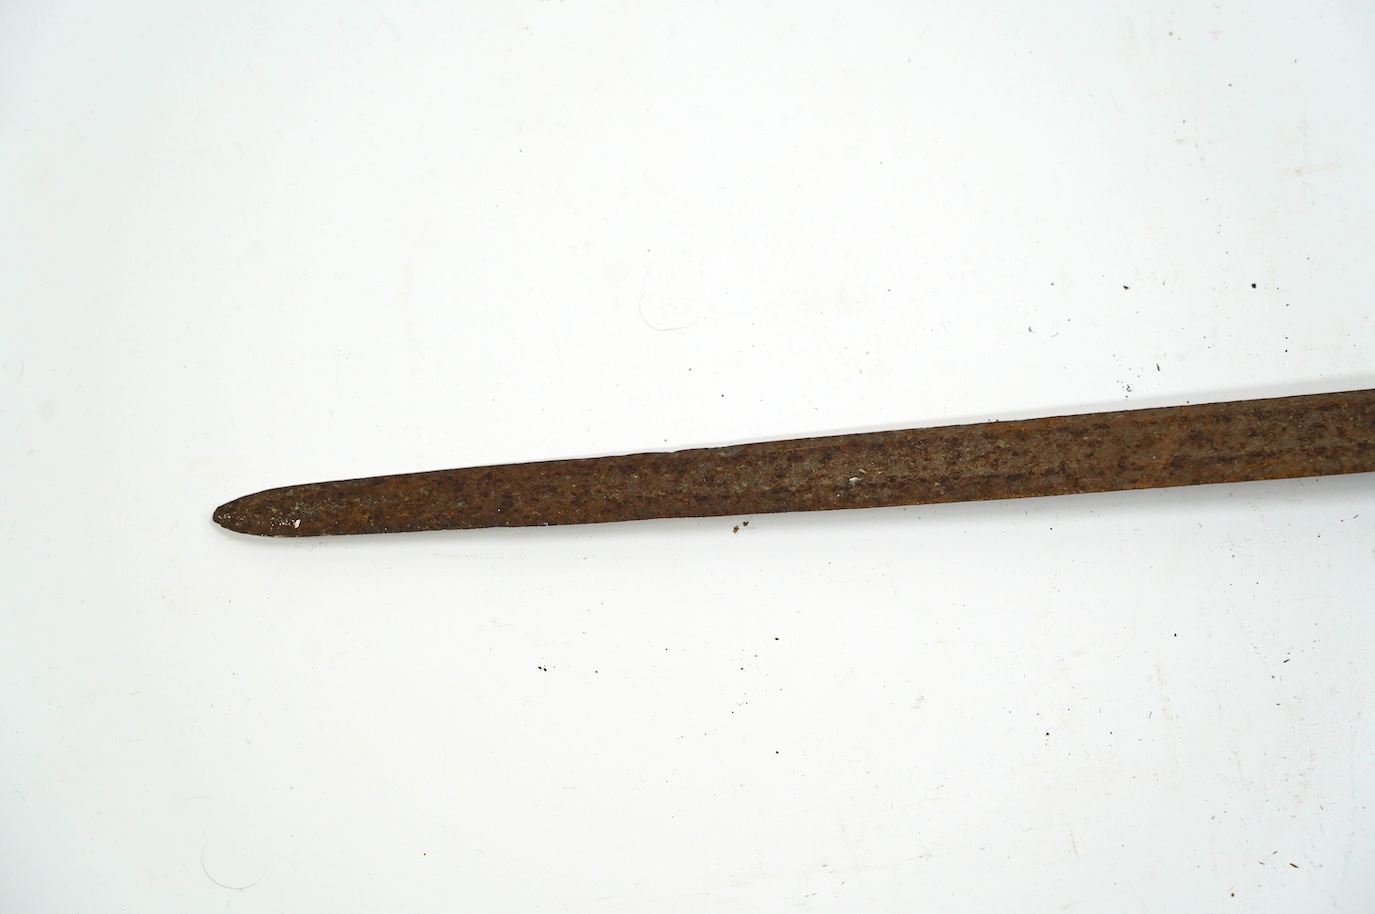 A British cavalry trooper’s sword, c.1750, straight single edged fullered blade, regulation iron hilt, with bun shaped pommel, blade 91.5cm. Condition - fair, rusted overall and grip missing